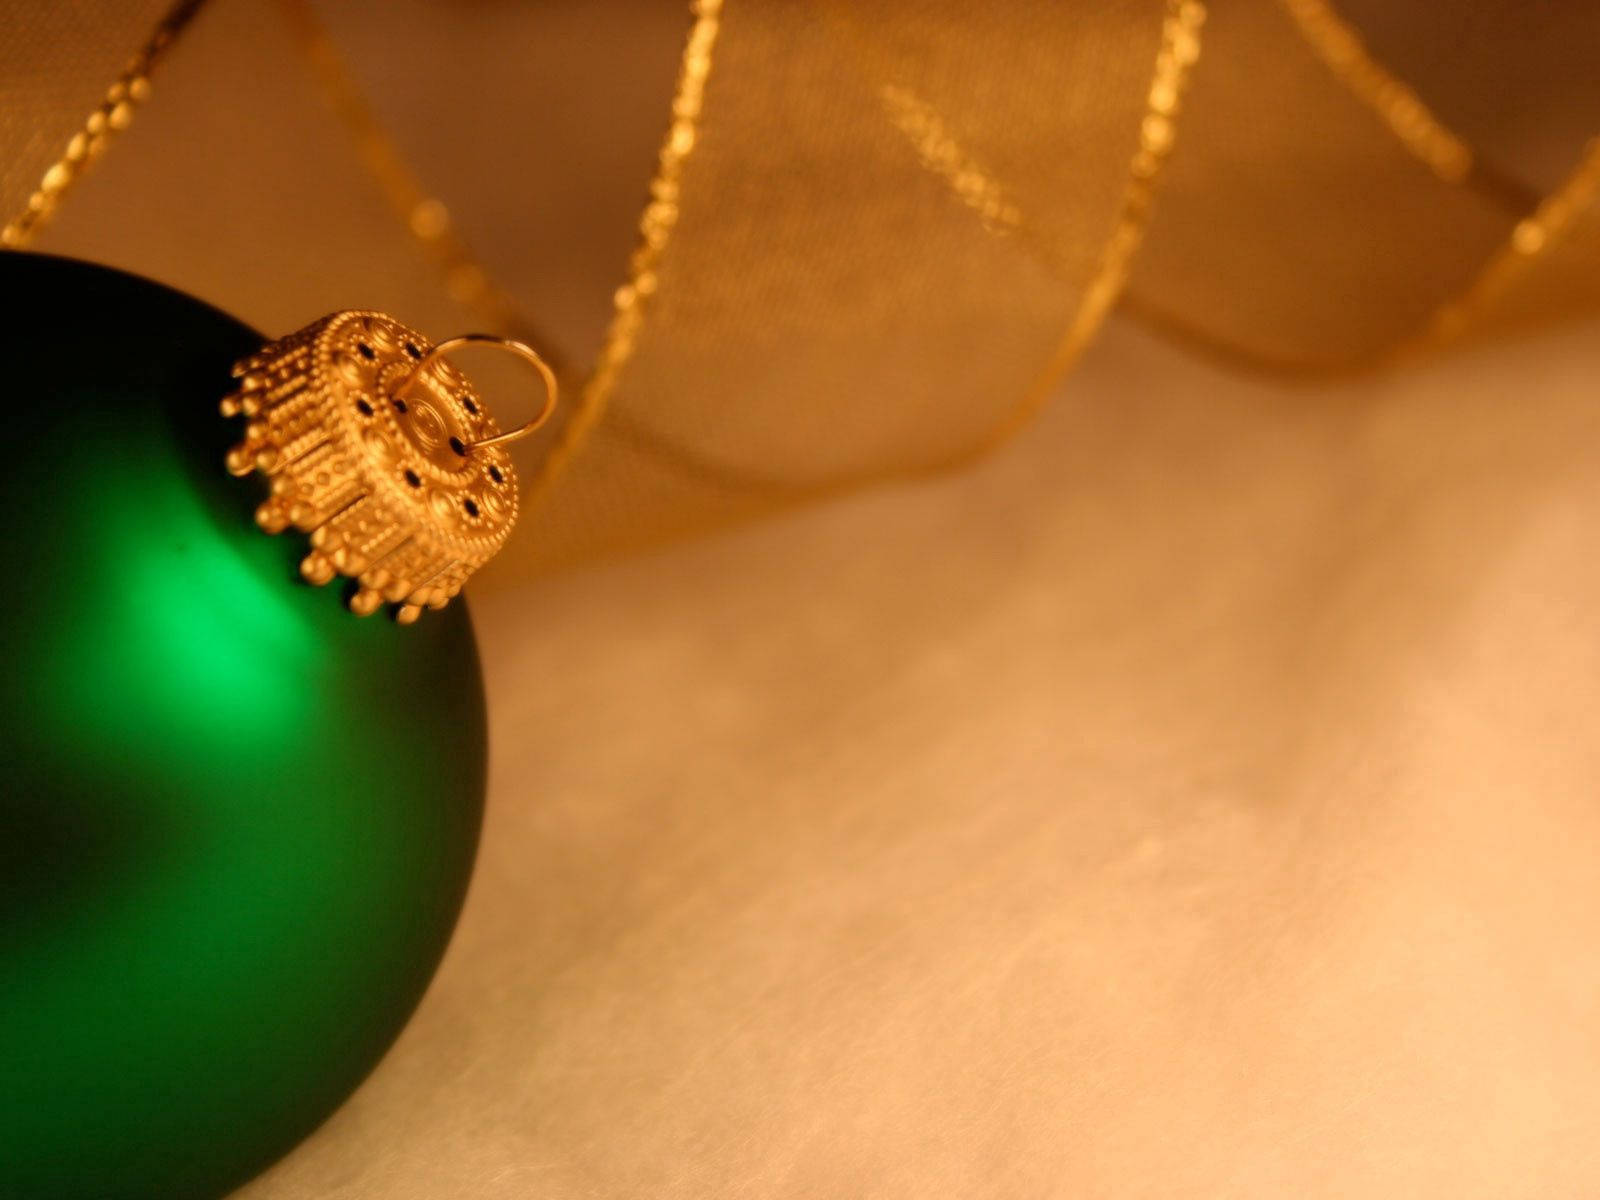 Close-up New Year's Green Ball Ornament